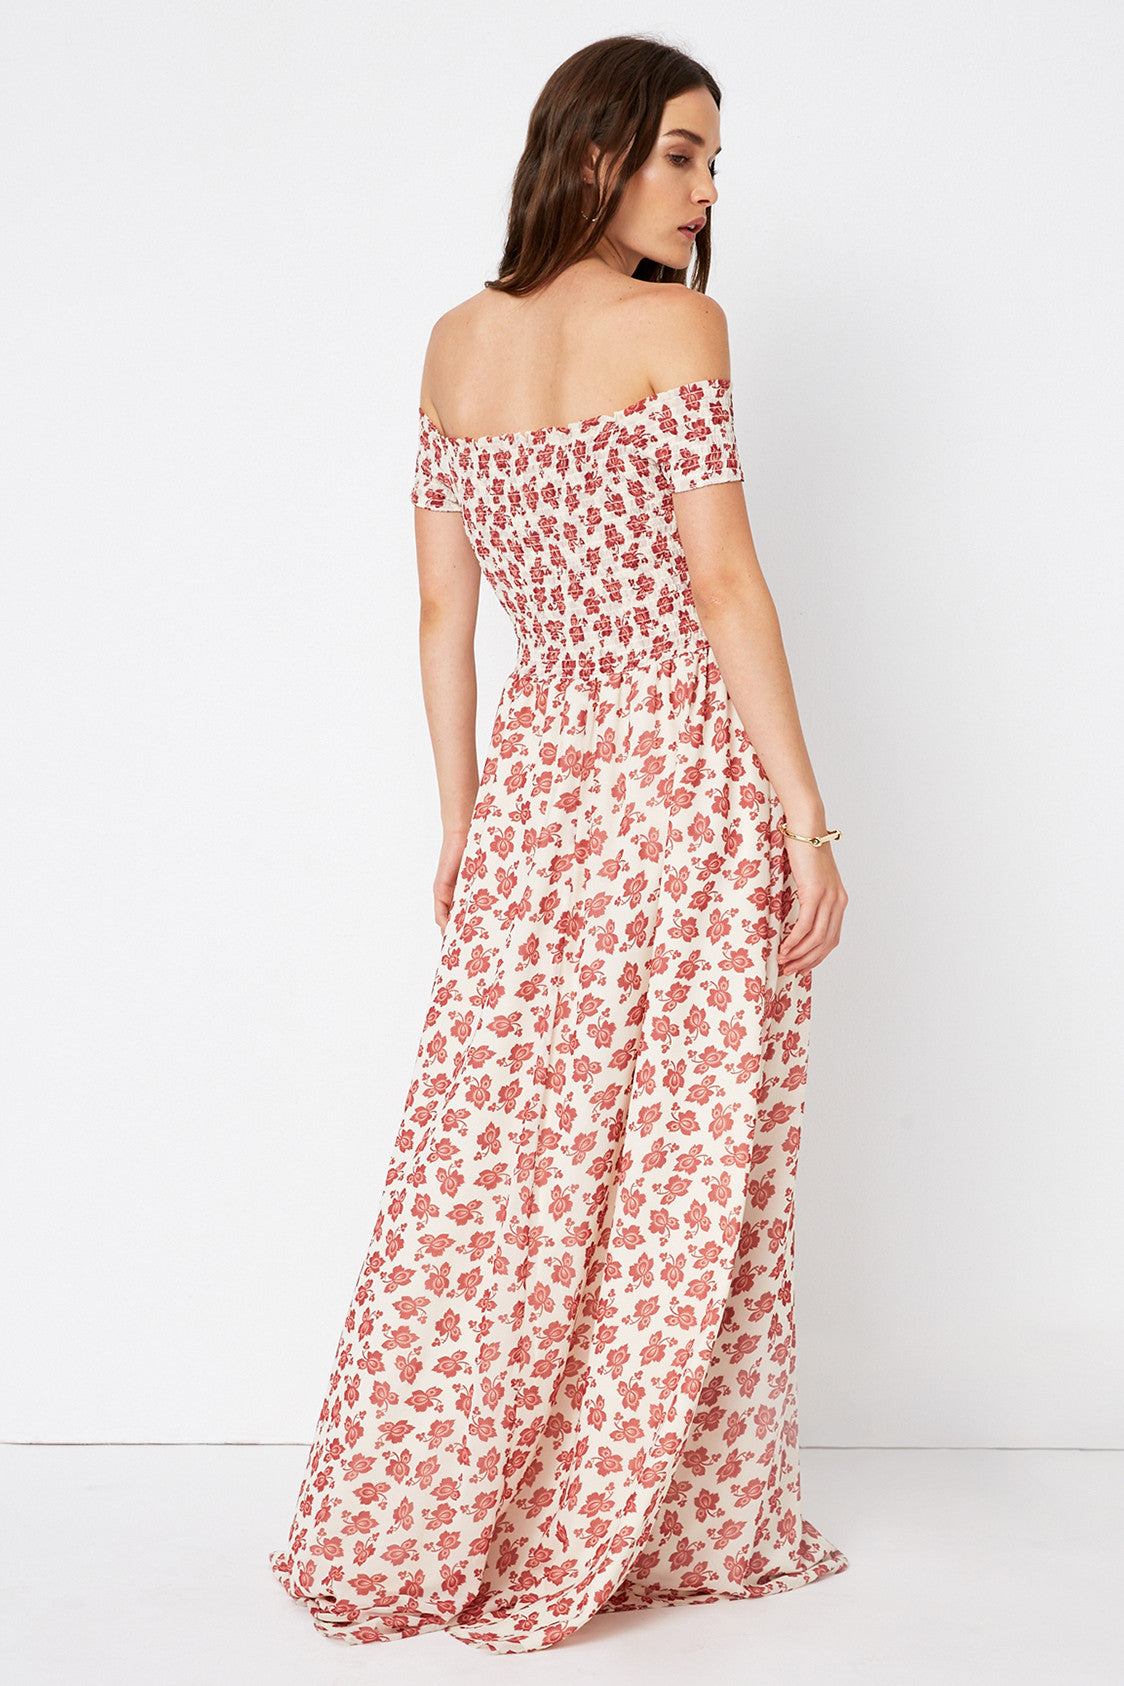 Henderson Maxi Dress in FLORAL PAISLEY